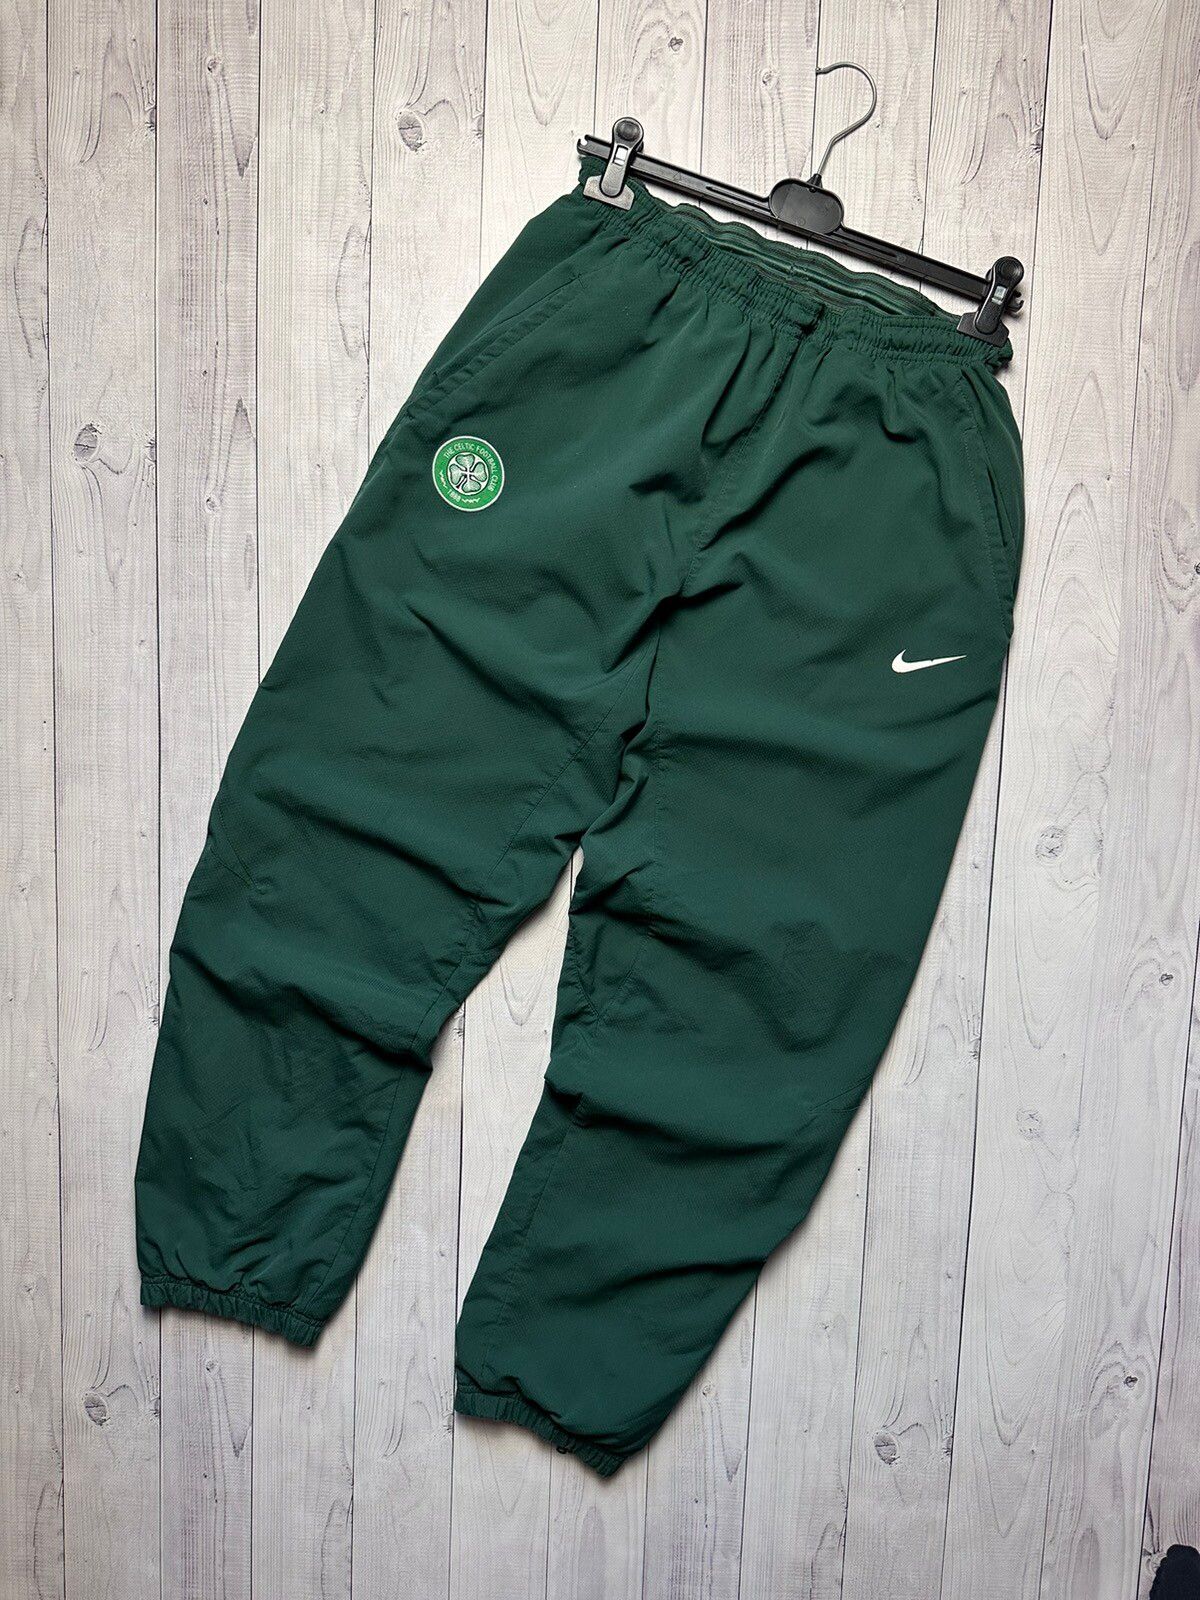 Pre-owned Nike X Soccer Jersey Vintage Nike Celtic Soccer Pants Drill Joggers Size M In Green